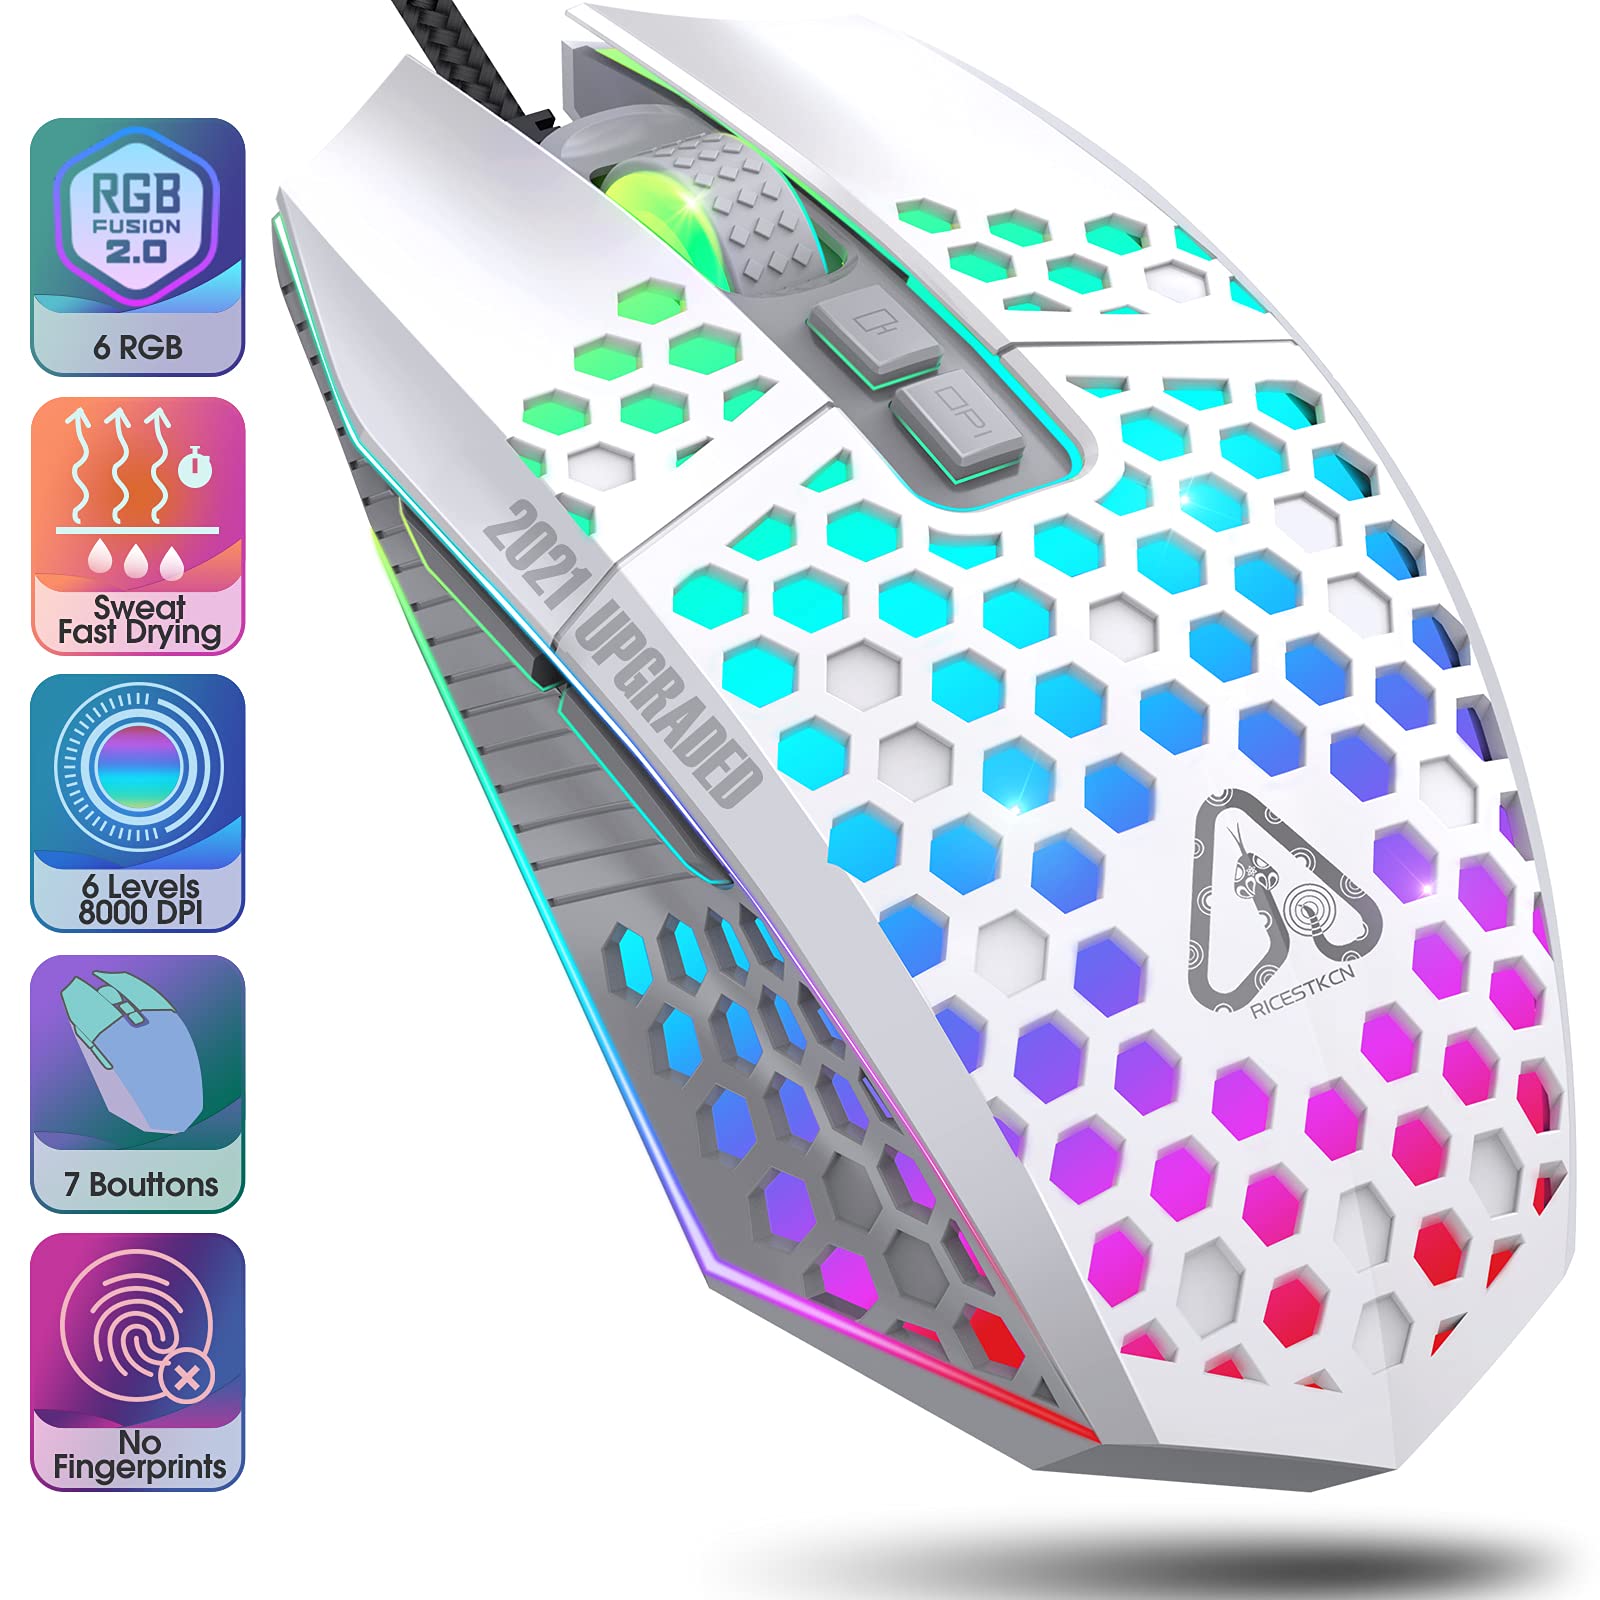 RICESTKCN Gaming Mouse PC Gaming Mice - Honeycomb Mouse Gamer RGB Gamingmouse Wired Ergonomic 6 Levels up to 8000 DPI 7 Programmable Buttons 7 Backlight Modes for PC Laptop Mac Windows Vista (White)